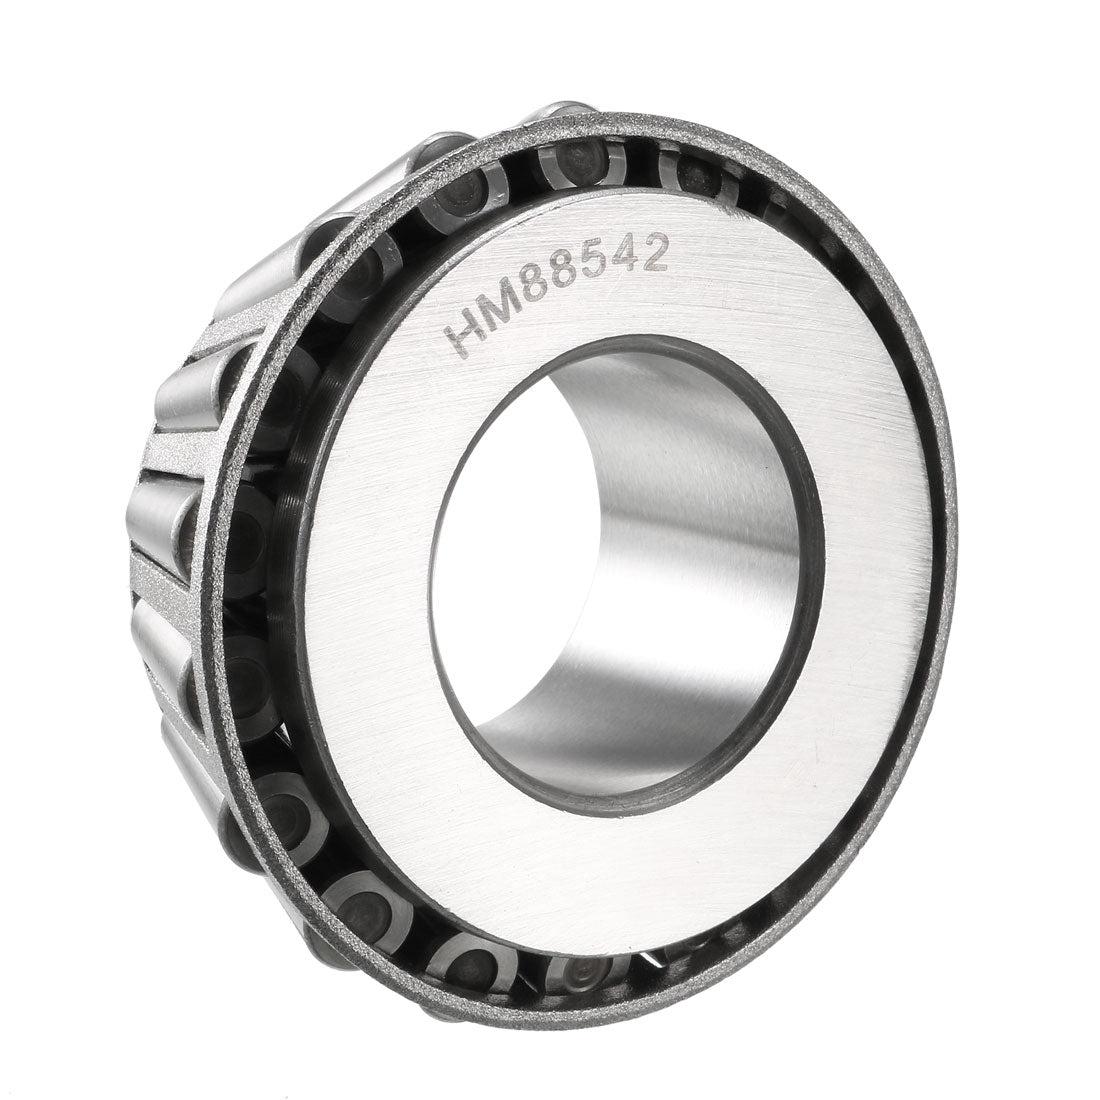 Uxcell Uxcell 14125A Tapered Roller Bearing Single Cone 1.25" Bore 0.771" Width